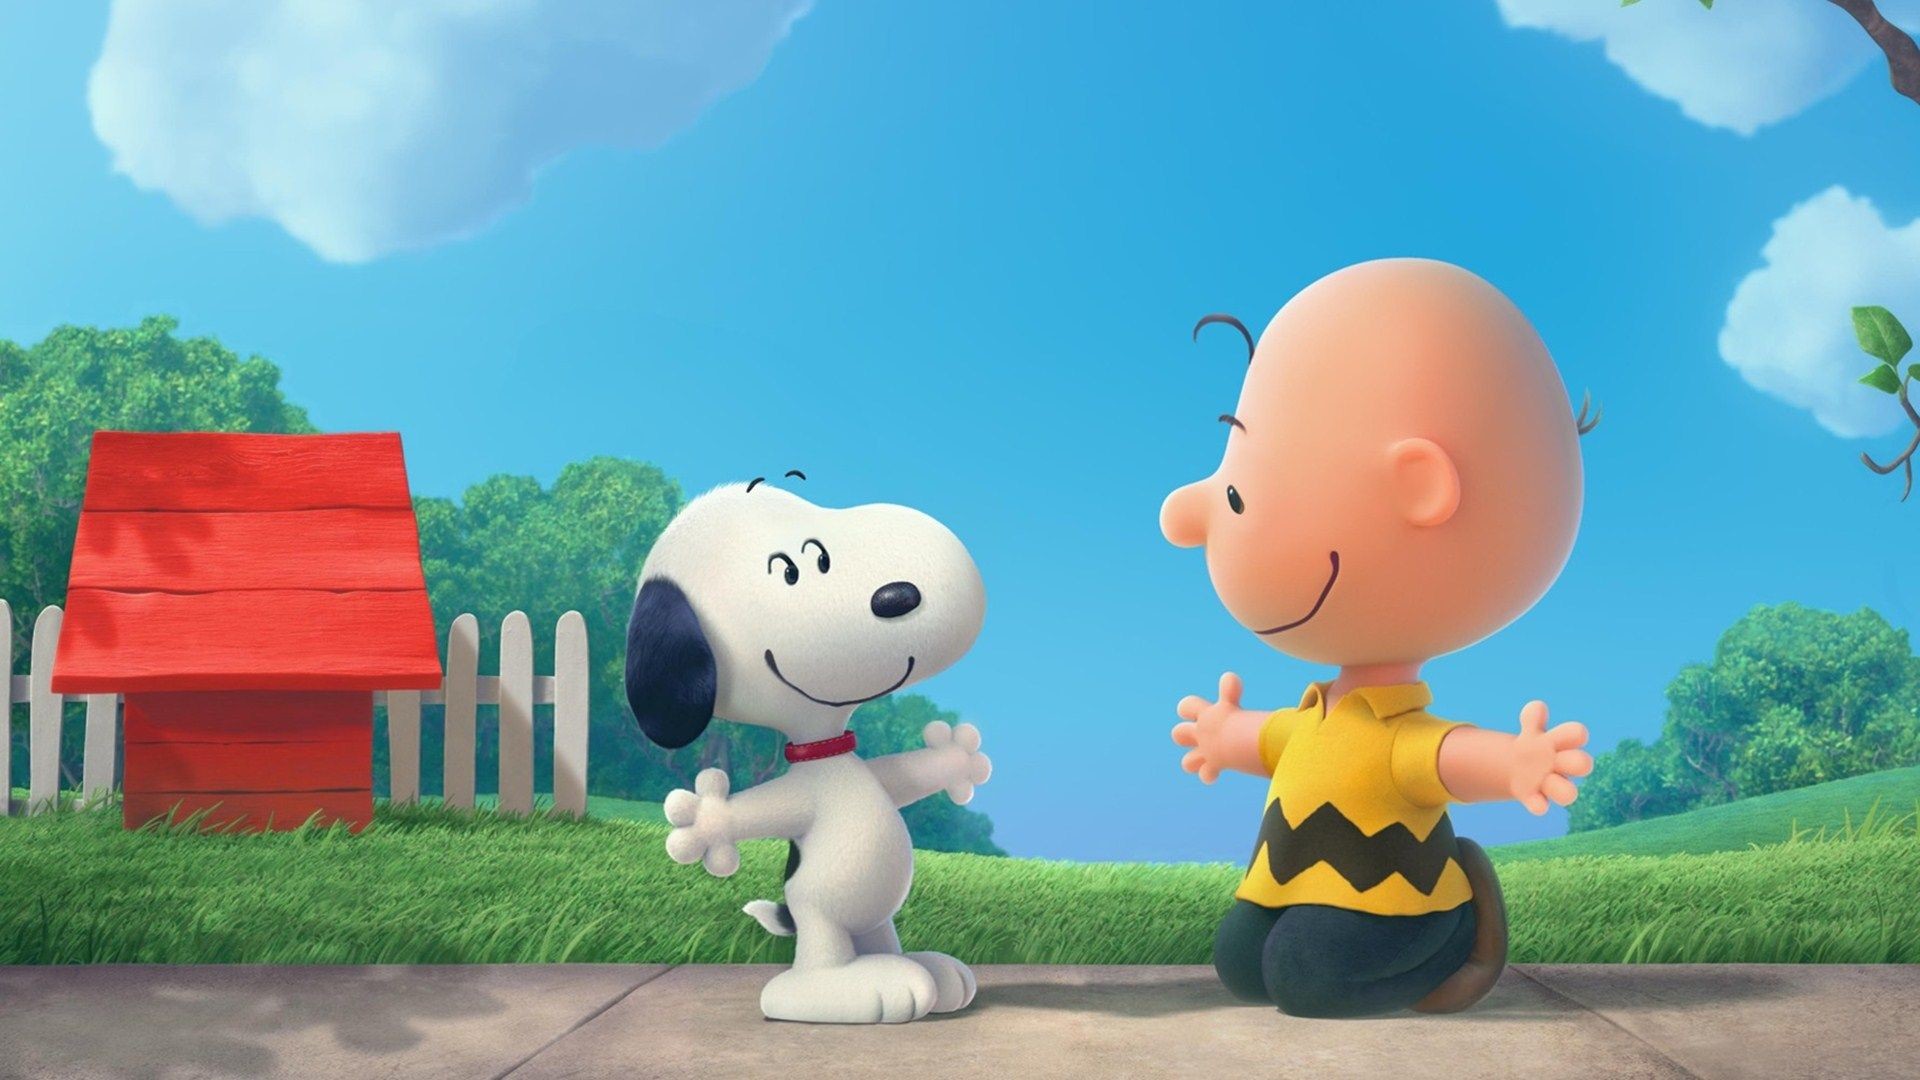 Charlie Brown and Snoopy are back in a new animated film. - Charlie Brown